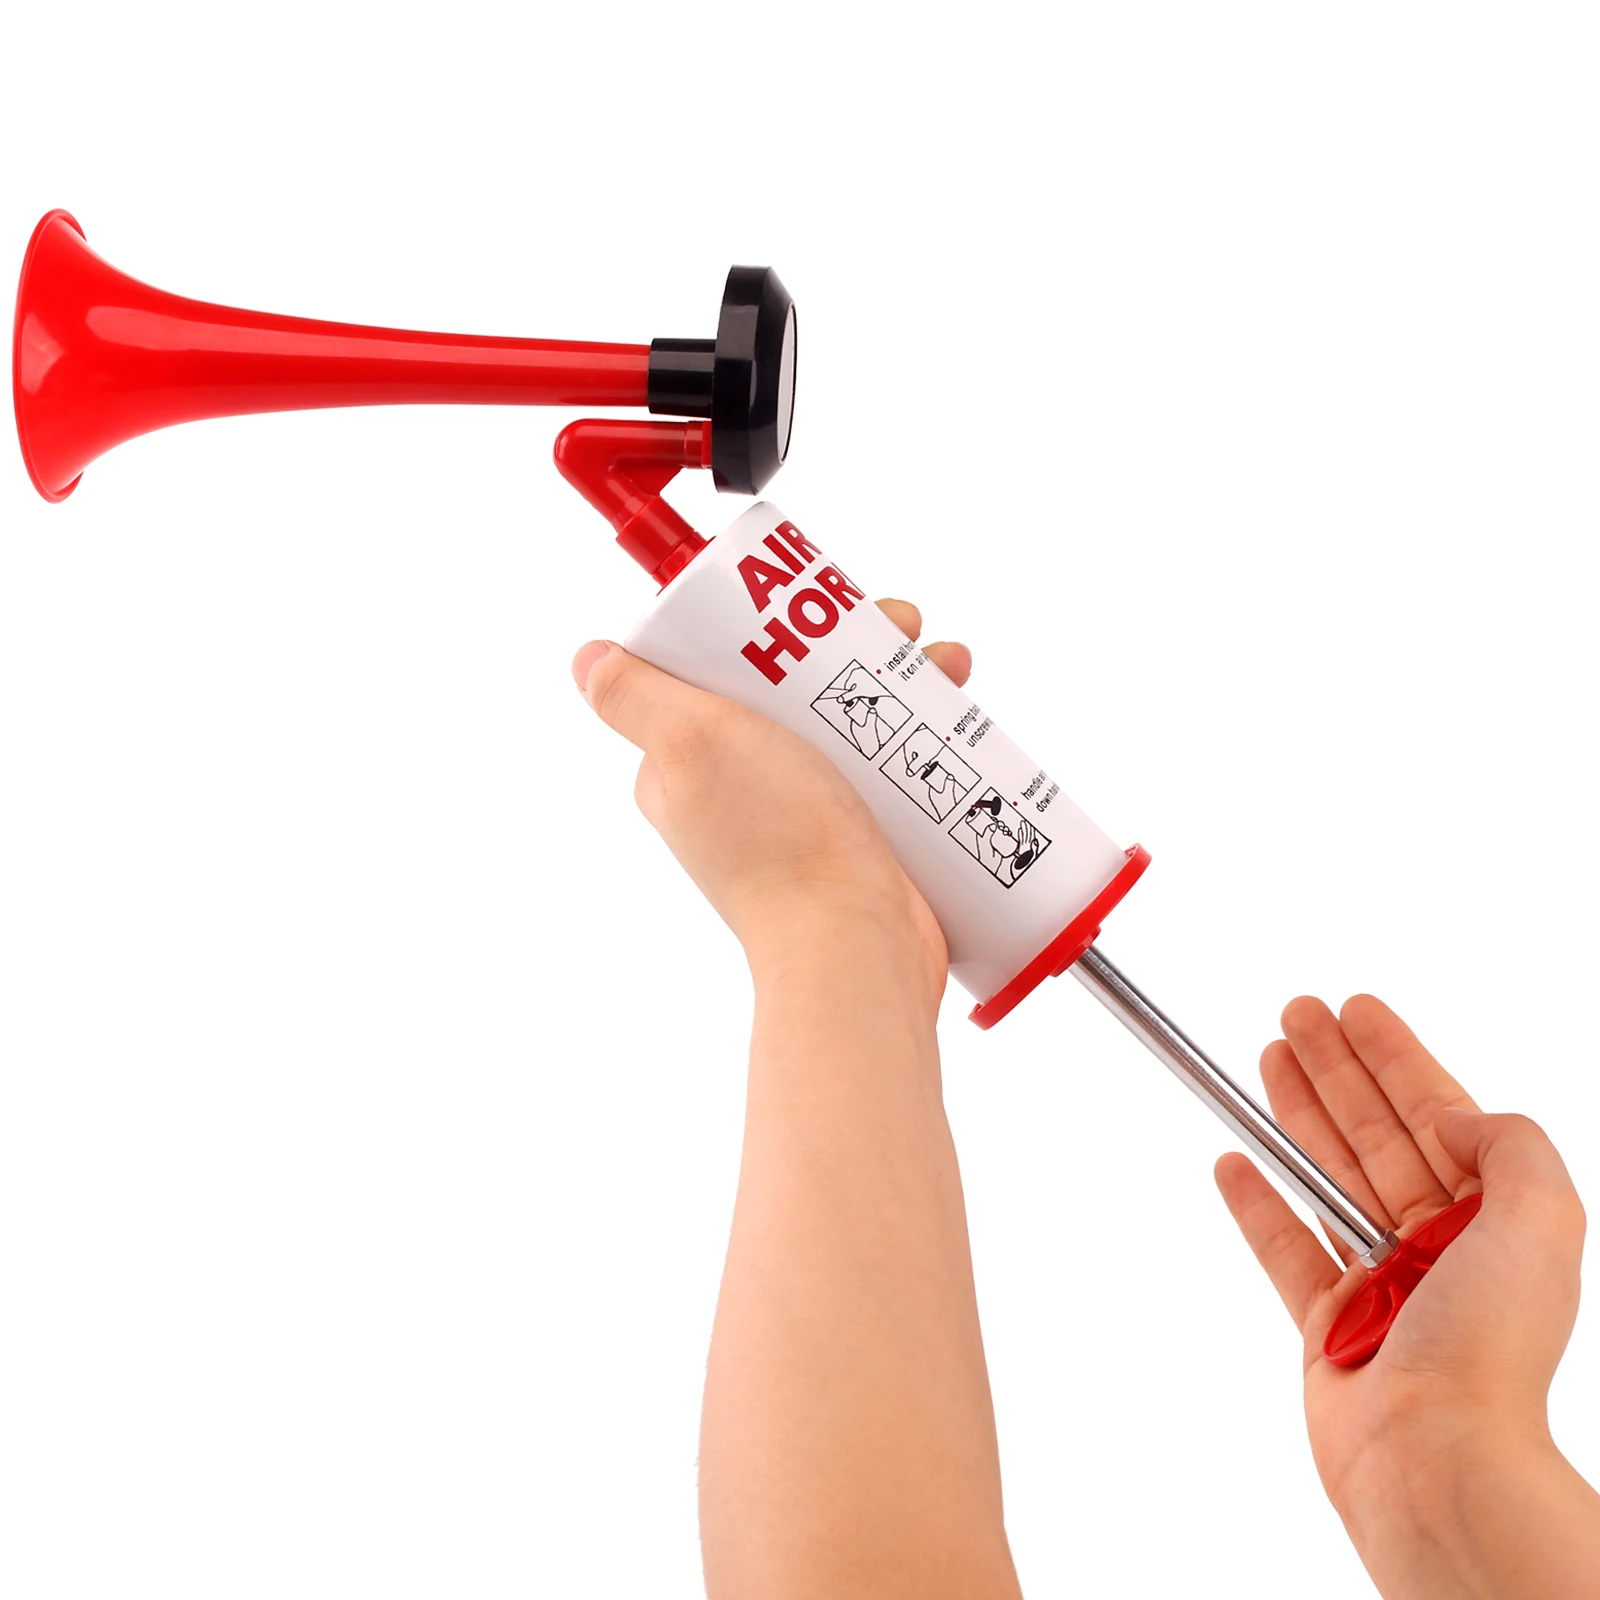 Air Horn for Boating Safety Canned Boat Accessories